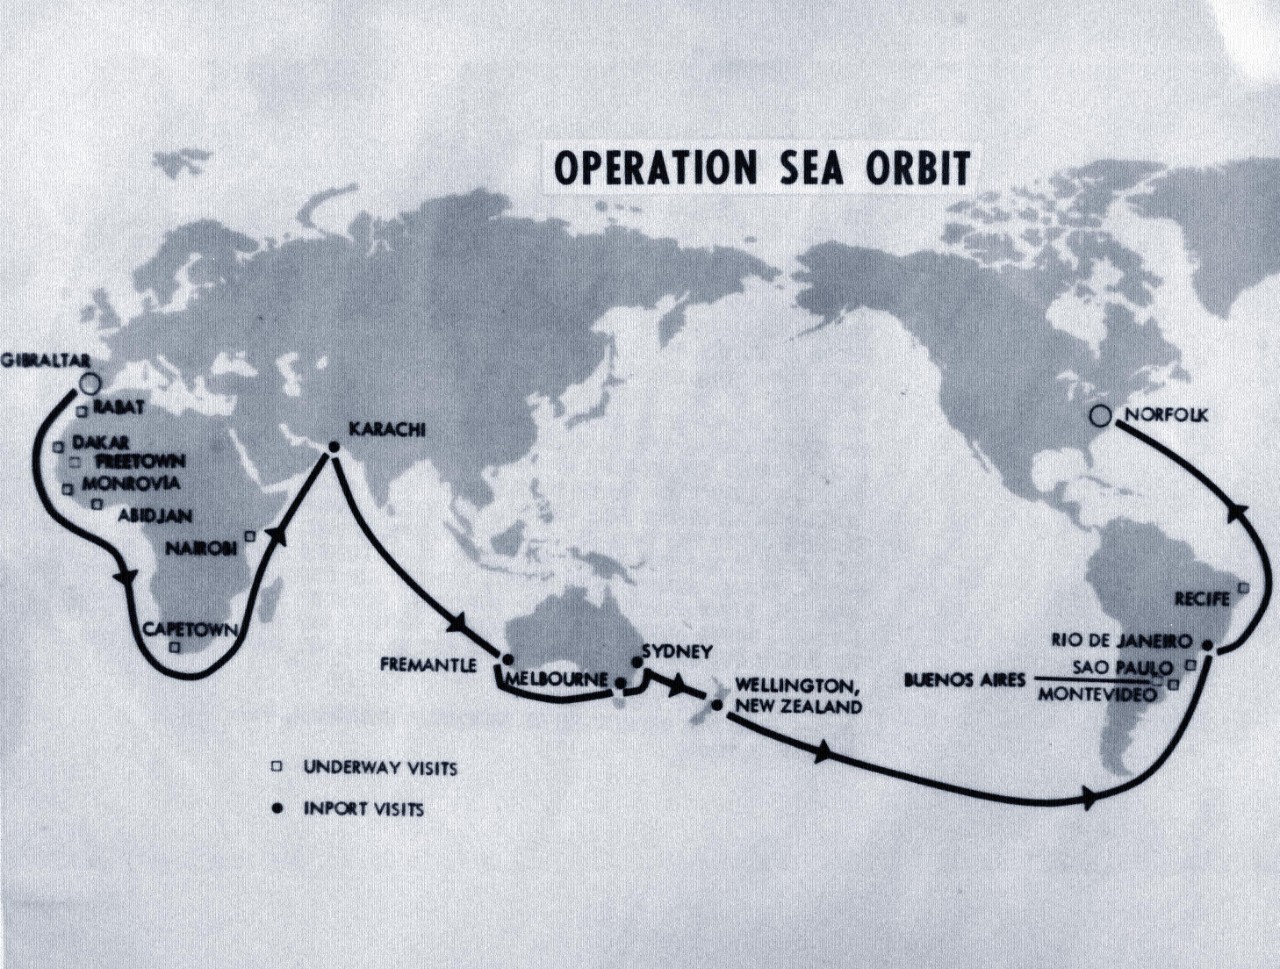 330-PSA-211-64 (USN 711474):  Operation Sea Orbit, 1964.   Operation Sea Orbit (Nuclear Task Force One) Map of Globe Circumnavigation.   Nuclear Task Force One consisted of: USS Enterprise (CVAN 65); USS Long Beach (CLGN 9), and USS Bainbridge (DLGN 25), which traveled 34,732 statute miles without refueling or taking on supplies for the more than 6,000 men aboard.   The trip commenced on July 31, 1964 when the ships completed operations in the Mediterranean and sailed past Gibraltar.  Task Force One, Commanded by Rear Admiral Bernard M. Strean, was visited by officials of 12 countries.  Majority of the visits were underway calls in which planes from the Enterprise flew inland to pick up officials for an inspection of Task Force One and an air power demonstration.  In-port calls, where one or more of the ships dropped anchor, were made at Karachi, Pakistan, August 20-22; Fremantle, Australia, August 31-September 2; Melbourne, Australia, September 3-5; Sydney, Australia, September 4-7; Wellington, New Zealand, September 8-9; and Rio De Janerio, Brazil, September 23-25.  Underway visits were conducted with officials flown from Rabat, Morocco, July 31; Dakar, Senegal, August 3; Monrovia, Liberia and Freetown, Sierra Leone, August 4; Abidjan, Ivory Coast, August 5; Cape Town, Union of South Africa, August 10; Nairobi, Kenya, August 15; Montevideo, Uruguay and Buenos Aries, Argentina, September 21; Sao Paulo, Brazil, September 23; and Recife, Brazil, September 28.   Photograph released October 2, 1964.  Official U.S. Navy Photograph, now in the collections of the National Archives.   (2015/11/03).